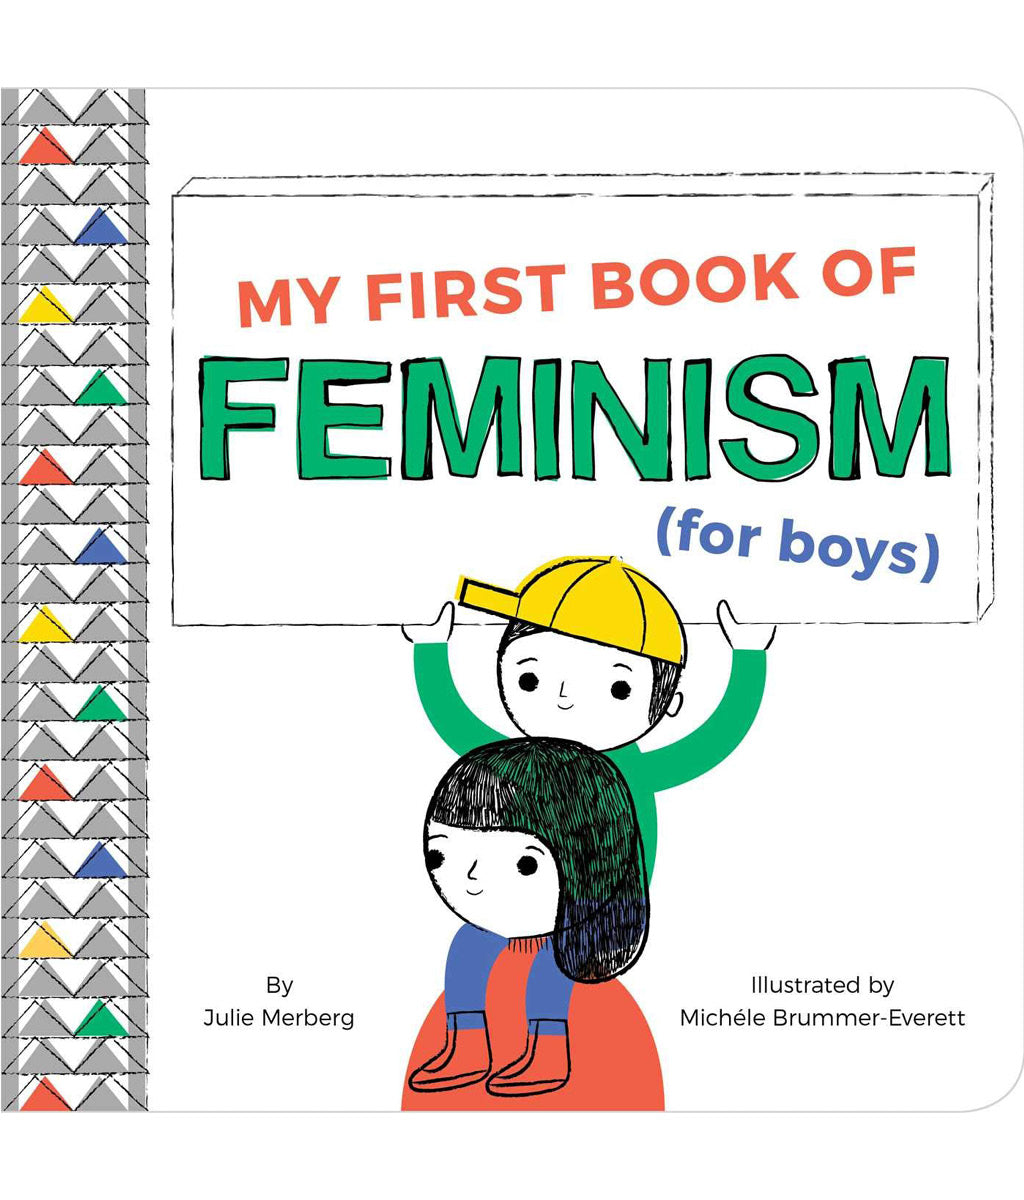 My First Book of Feminism (for boys) by Julie Merberg